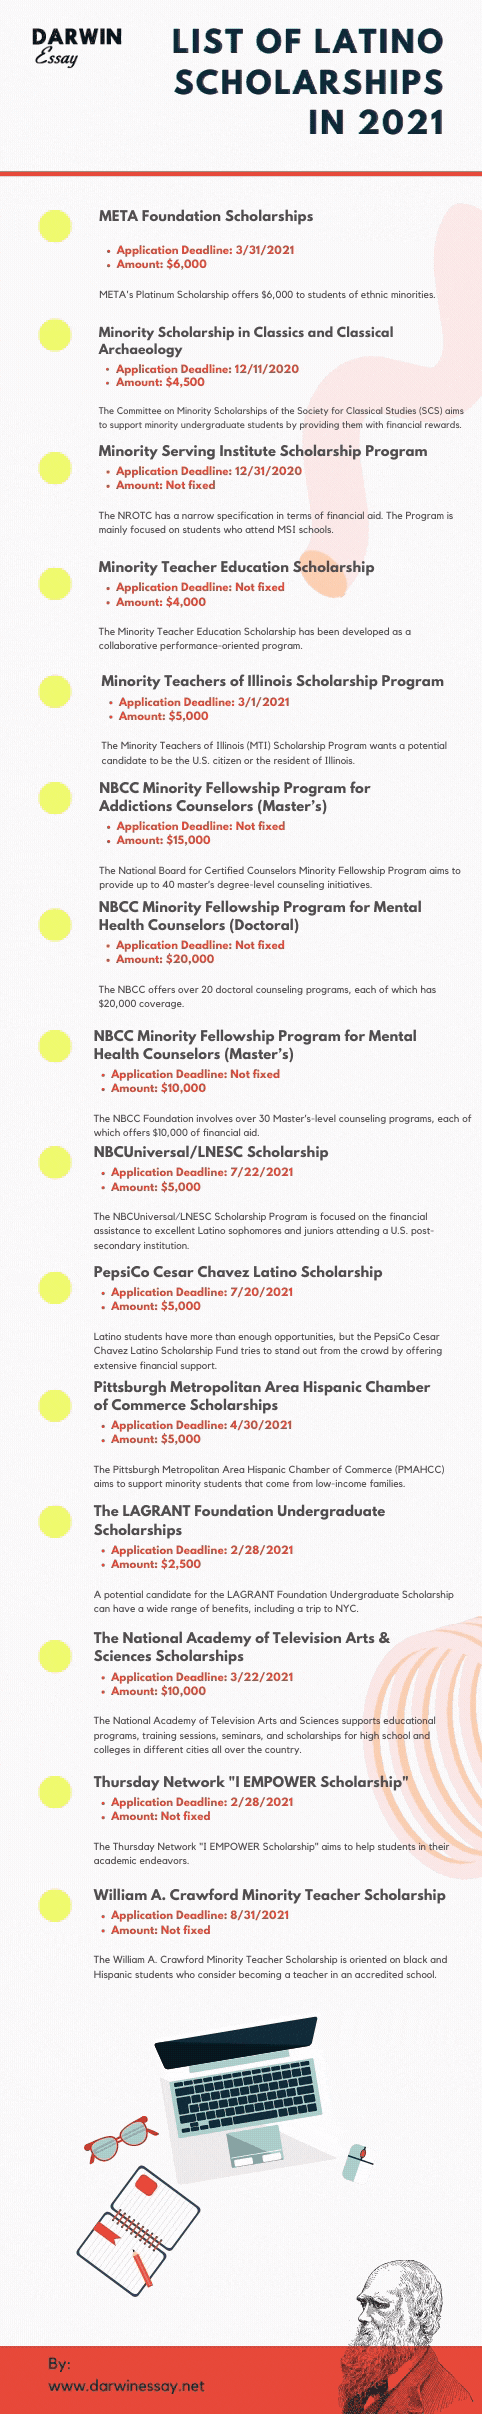 Latino Scholarships That Can Change Your Life for the Better #Infographic